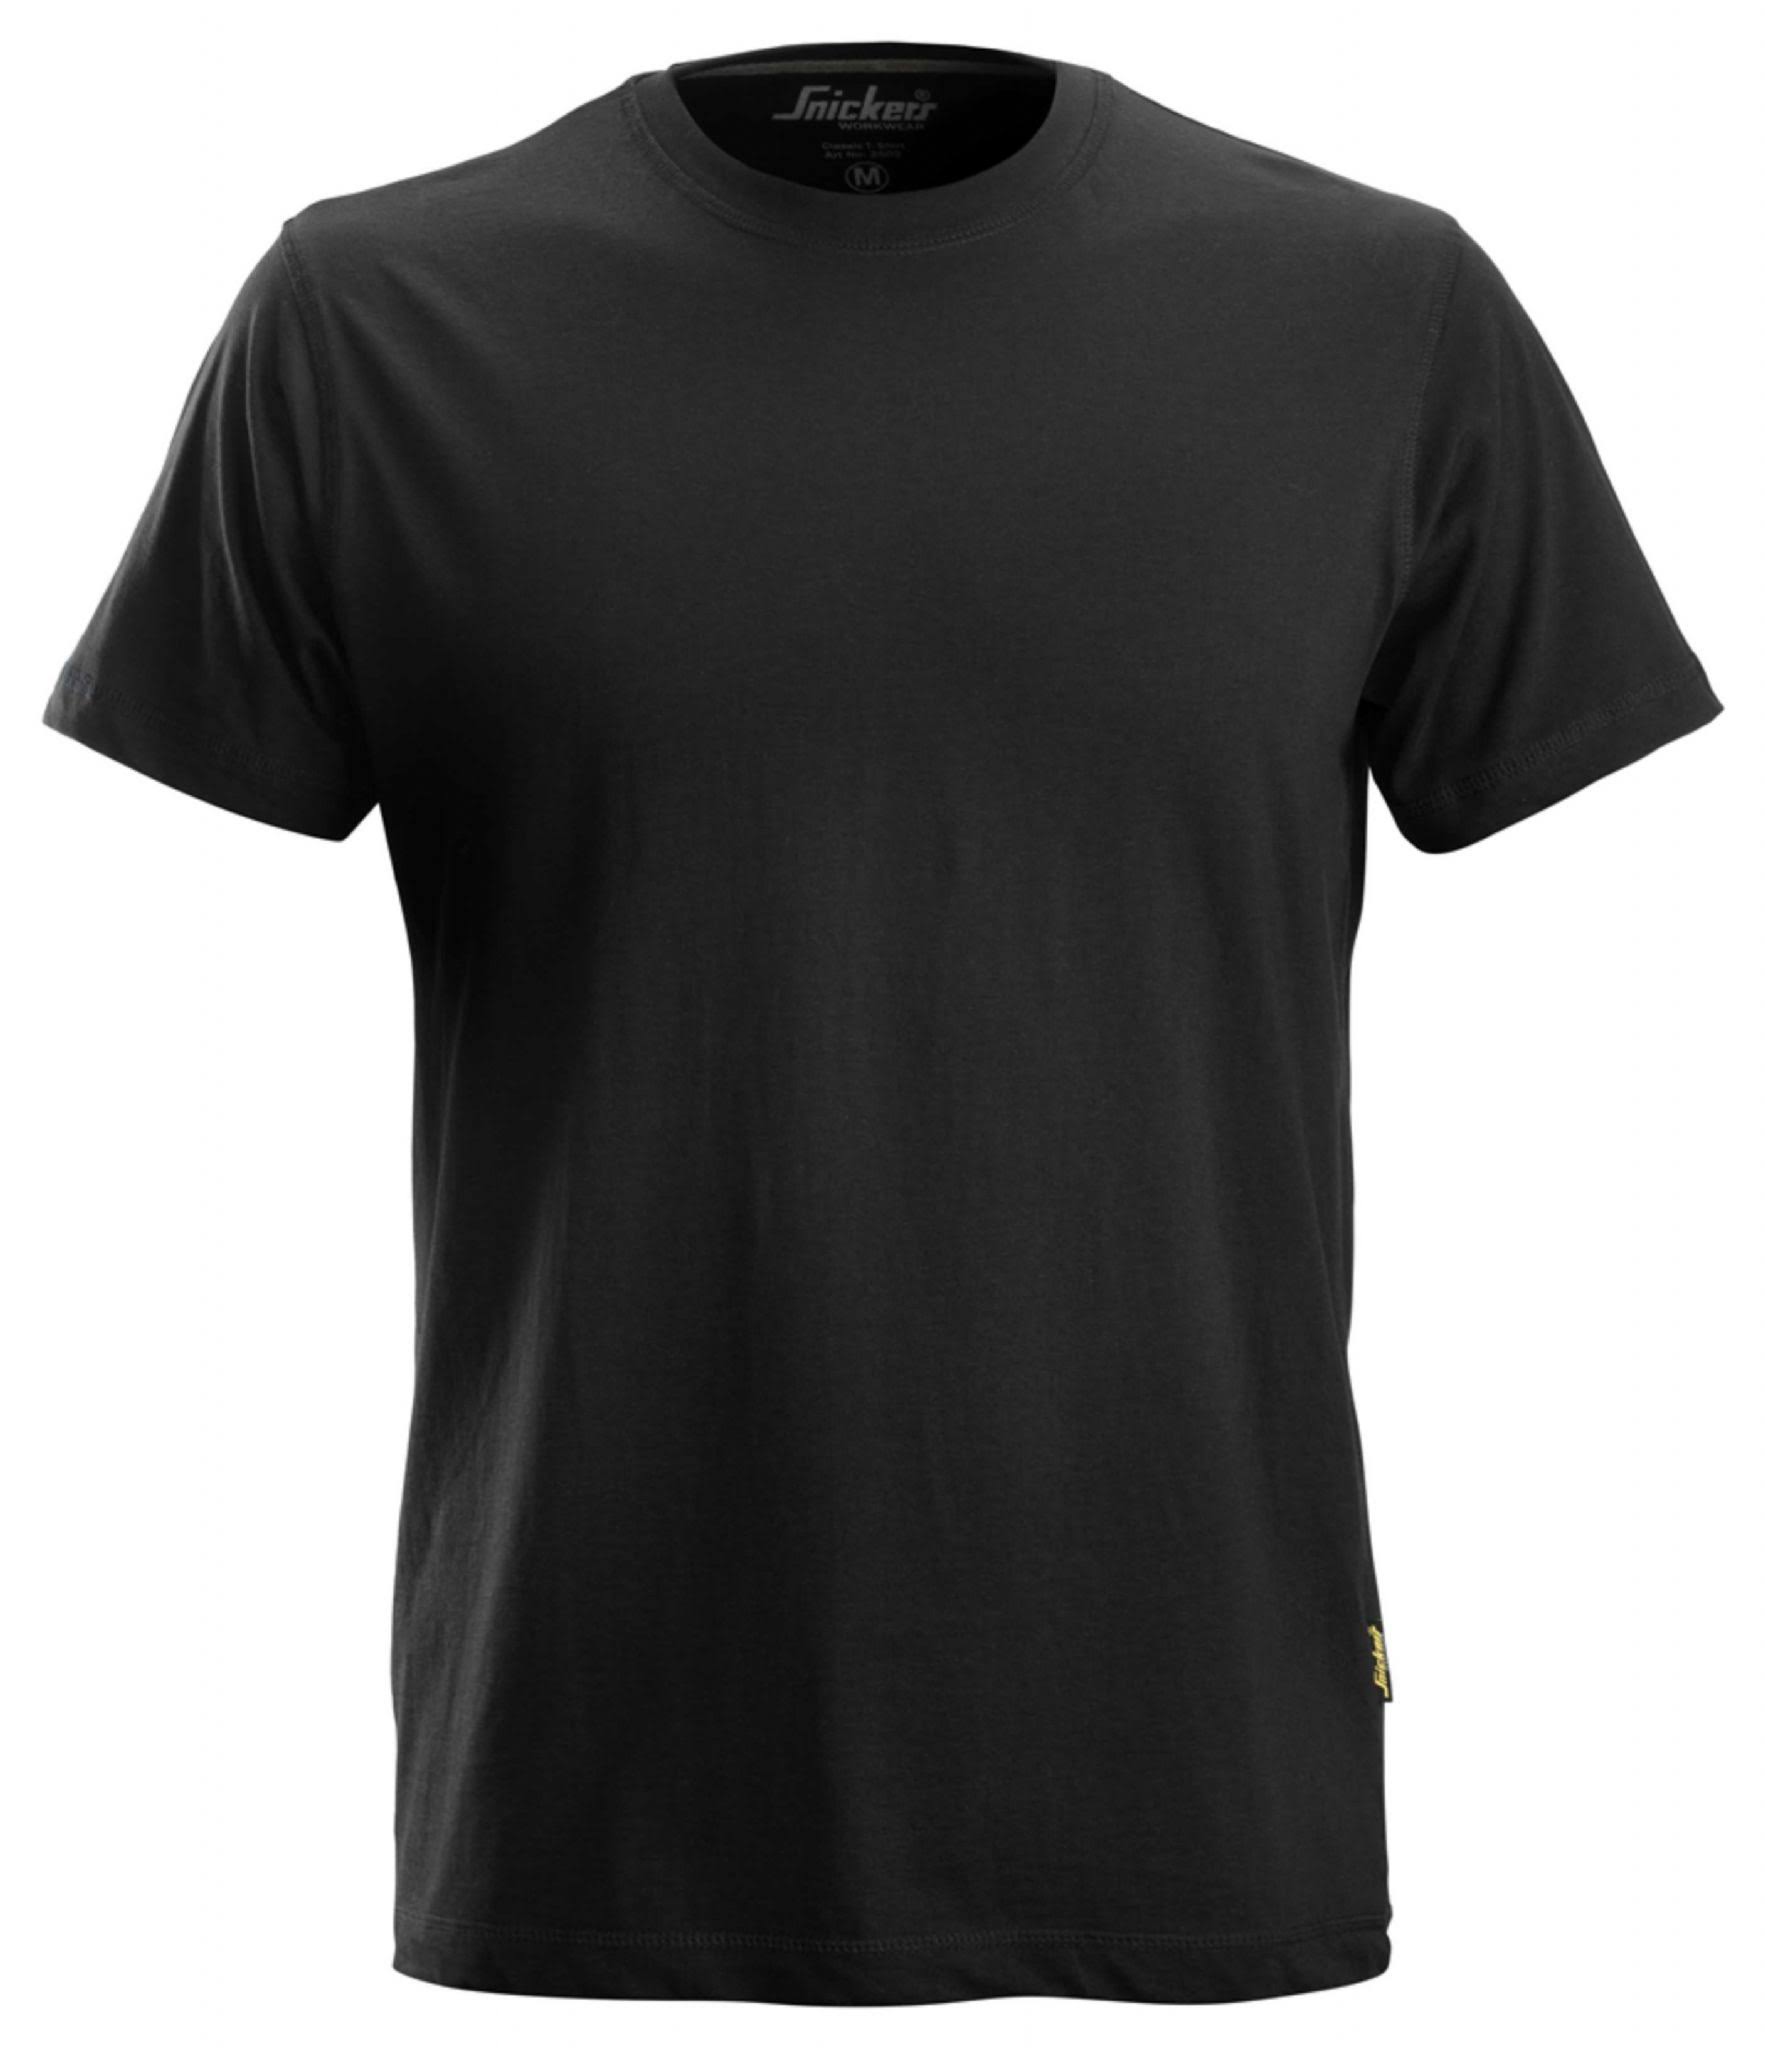 Snickers Classic T-Shirt - Black